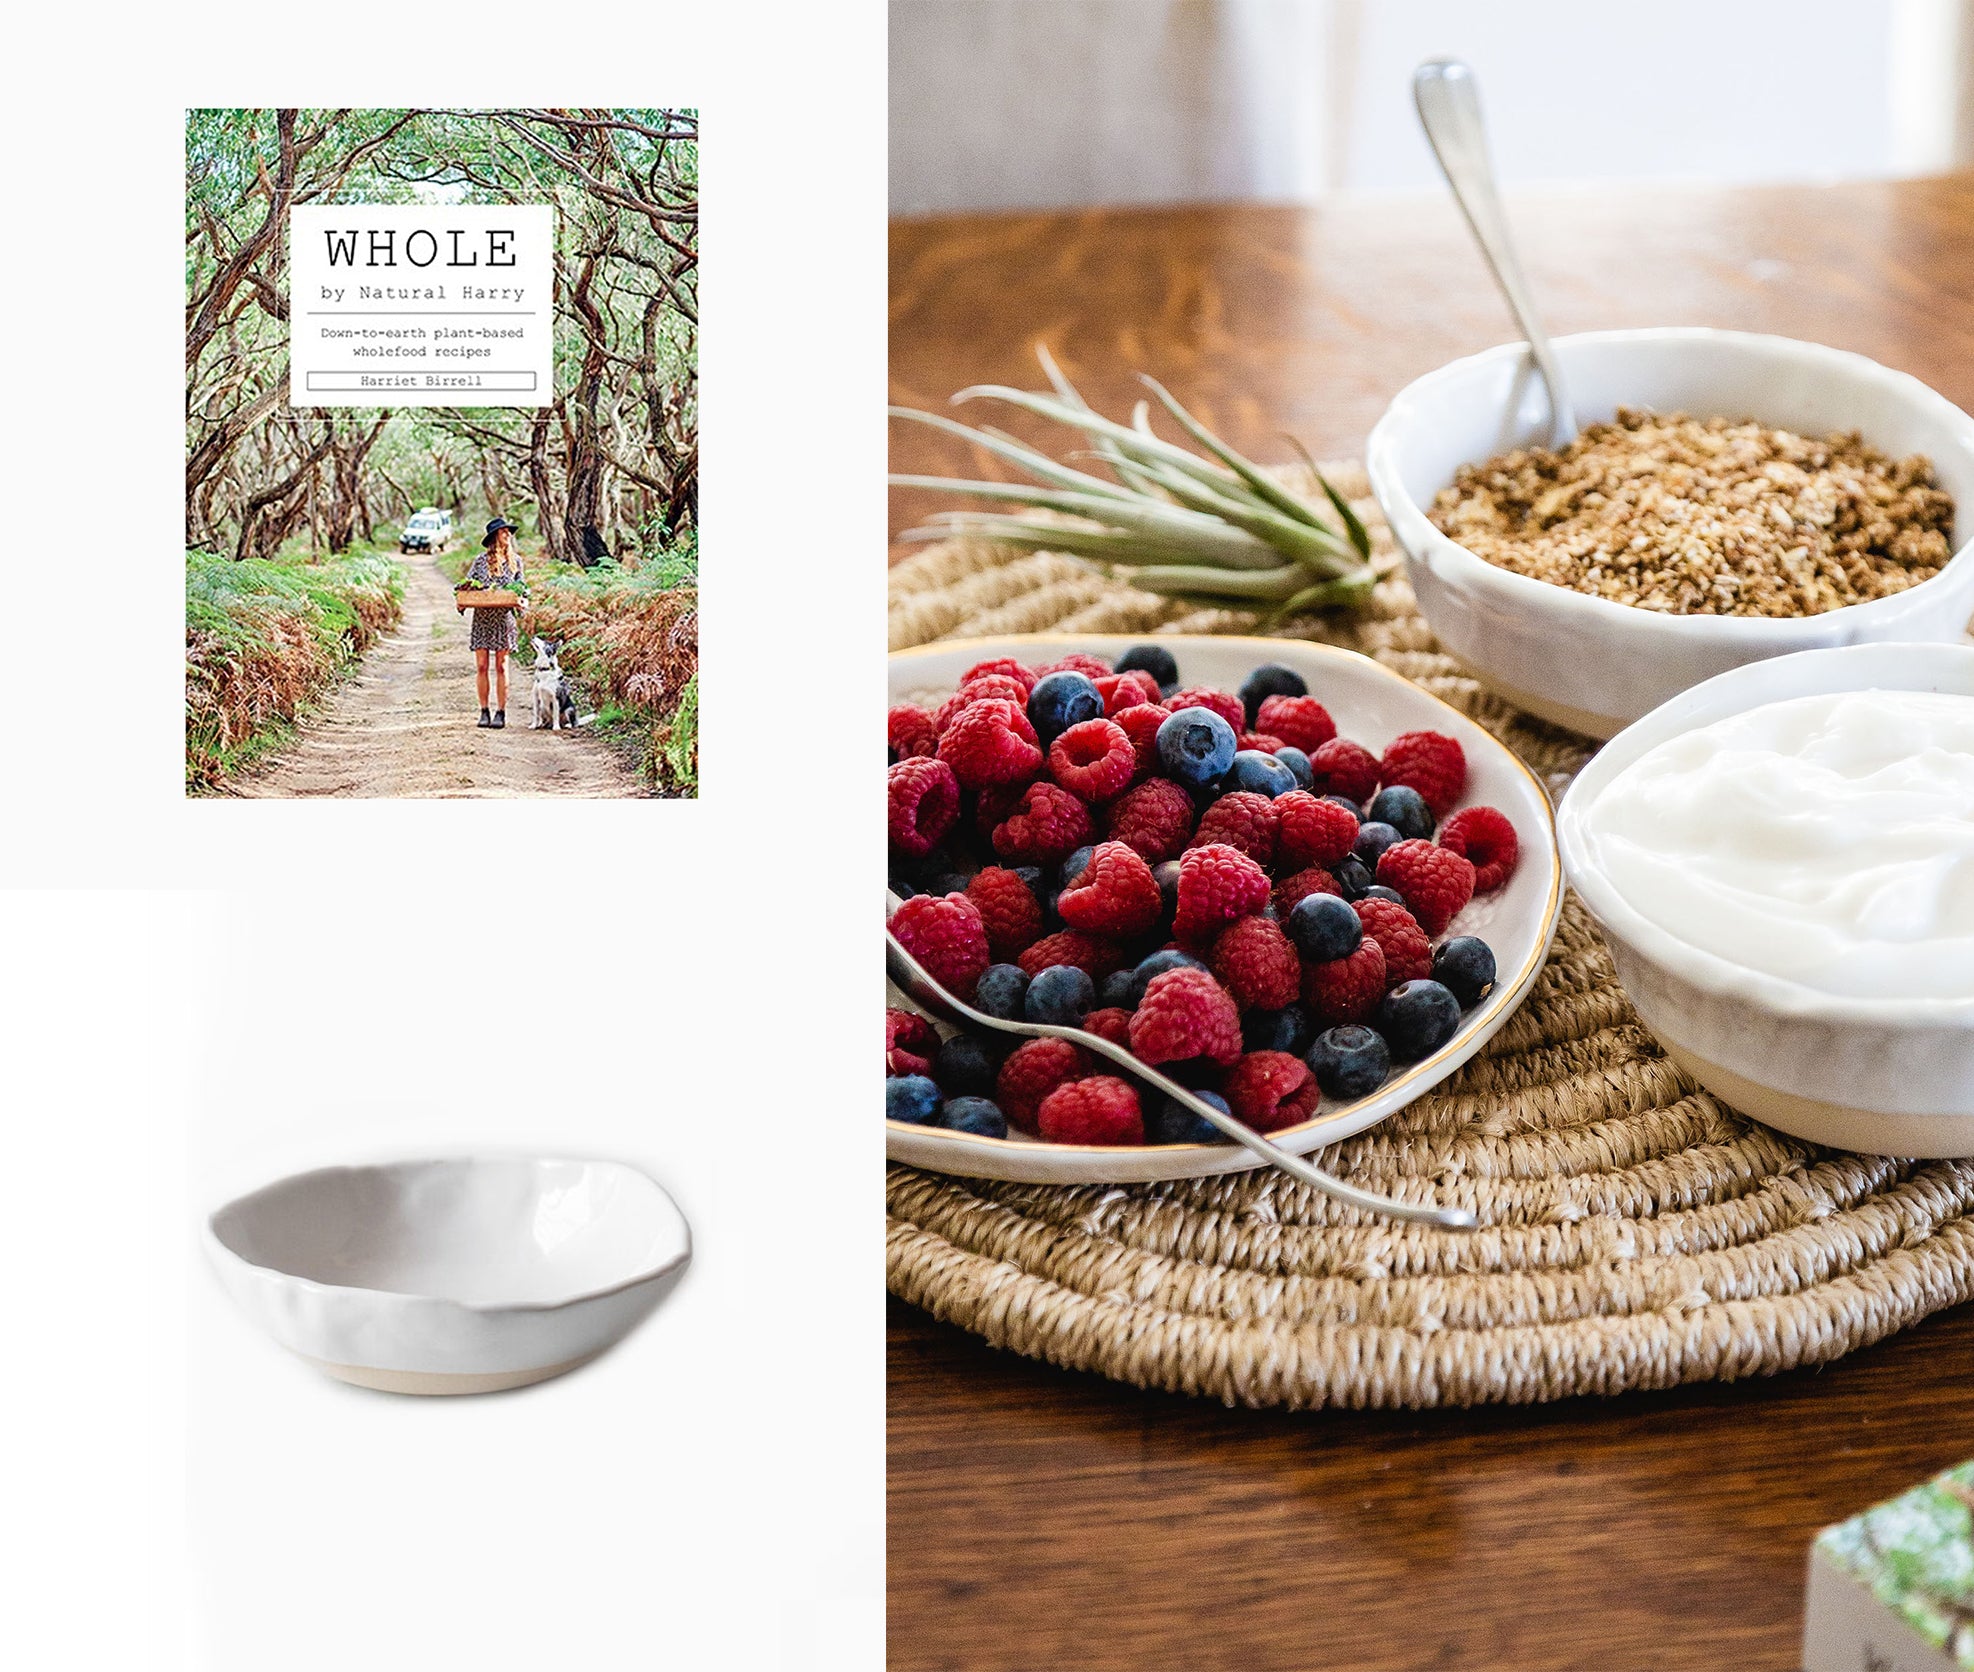 Whole Cookbook and Dessert Bowl